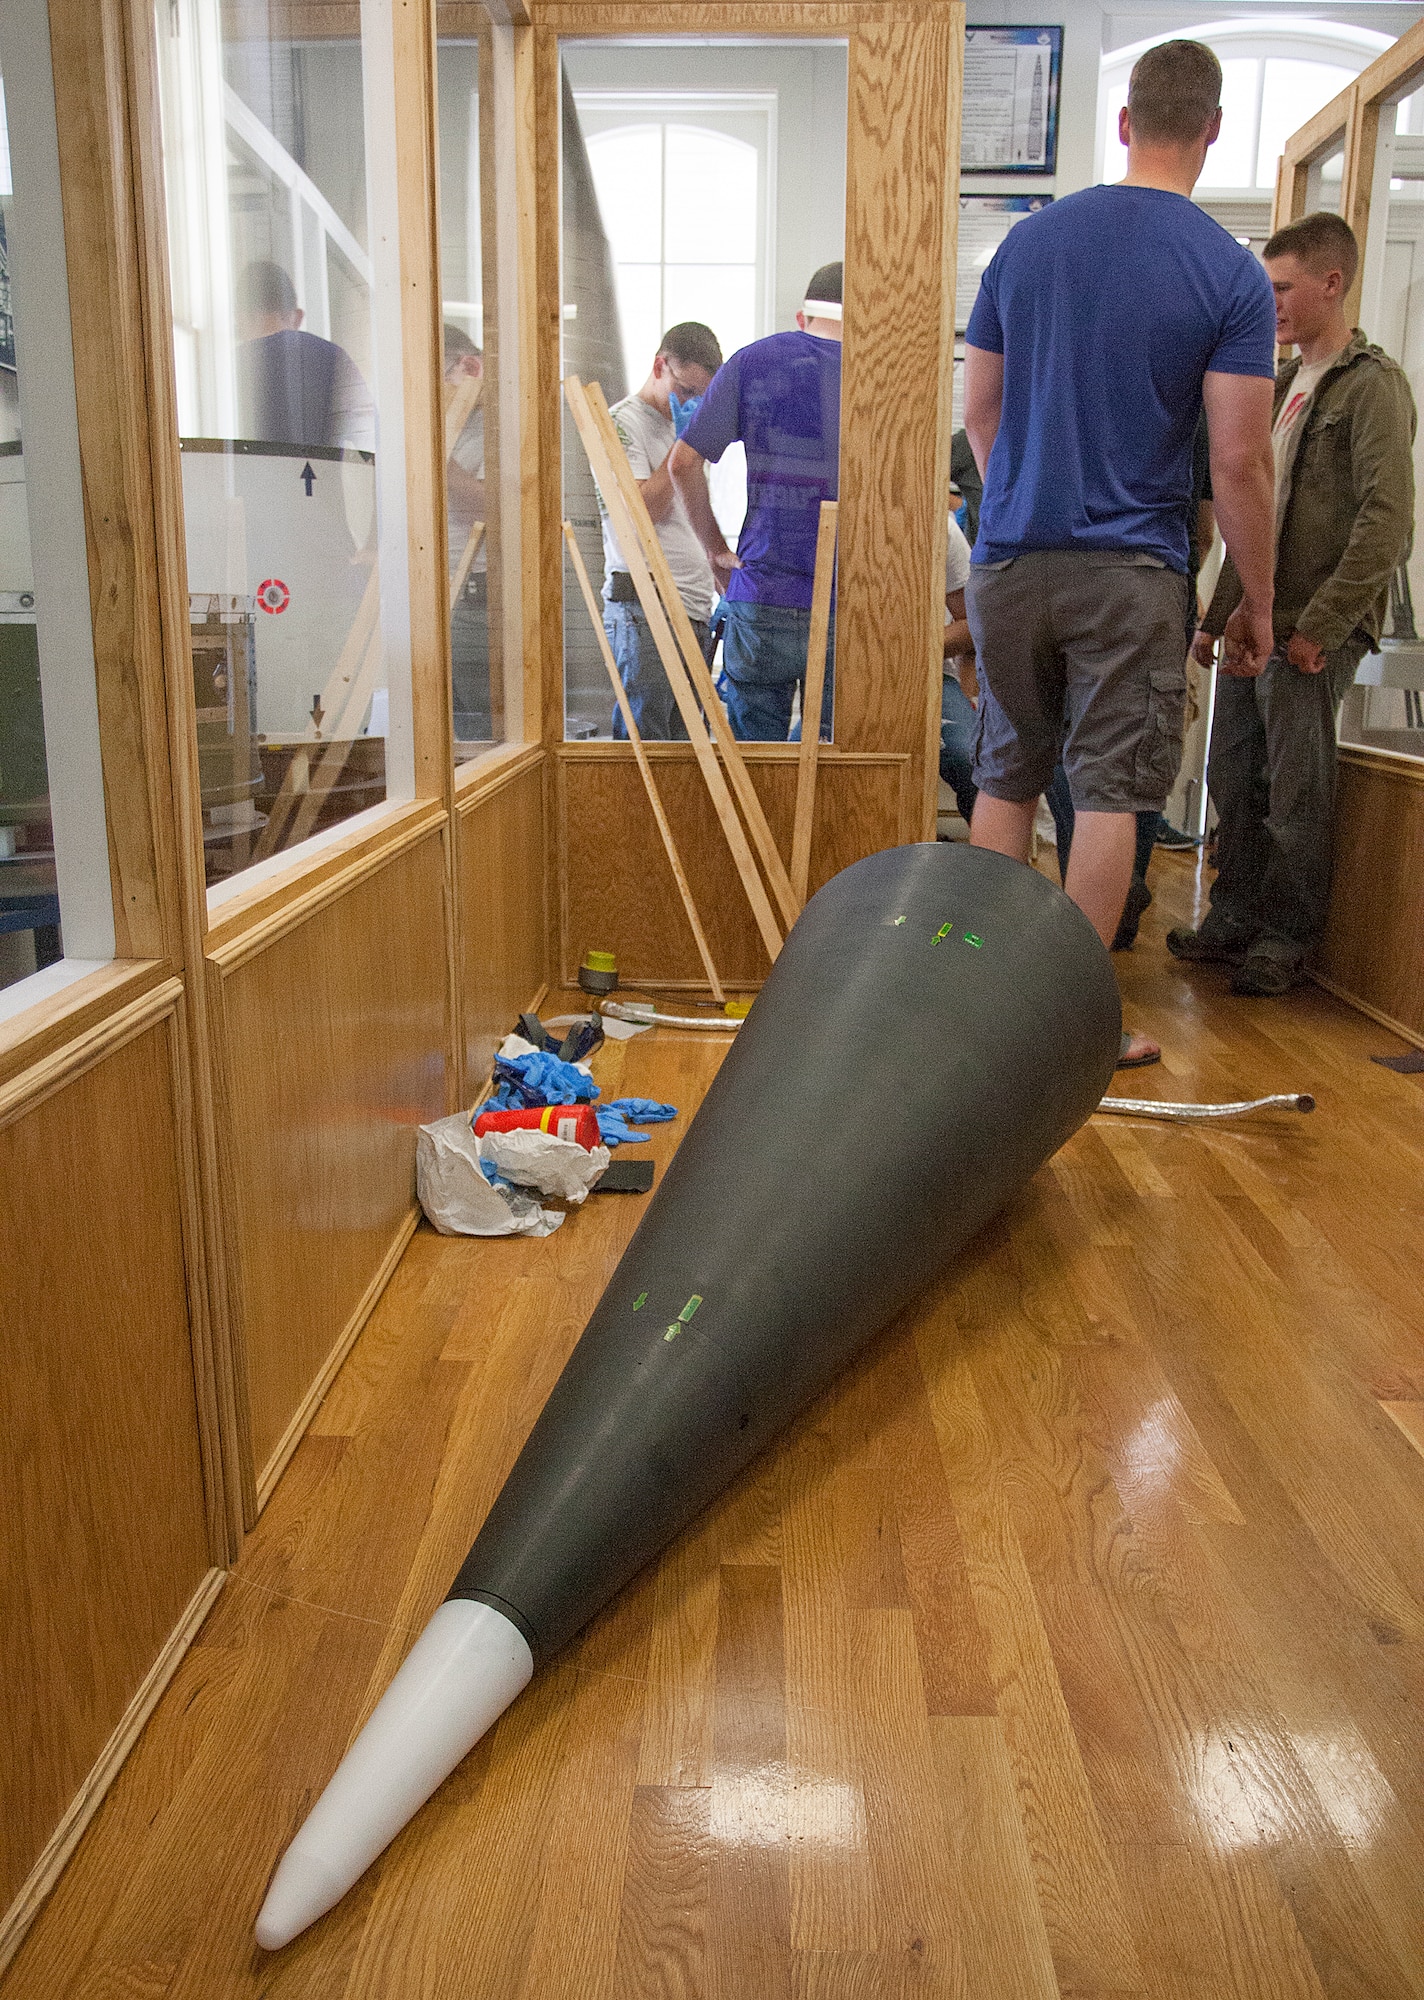 An ICBM re-entry system lies on the floor of the F.E. Warren ICBM and Heritage Museum, June 20, 2014, while Airmen of the 90th Munitions Squadron perform maintenance on the components of the museum’s Minuteman III display. Airmen from the squadron volunteered on their day off to clean and assemble pieces of the display. (U.S. Air Force photo by R.J. Oriez)